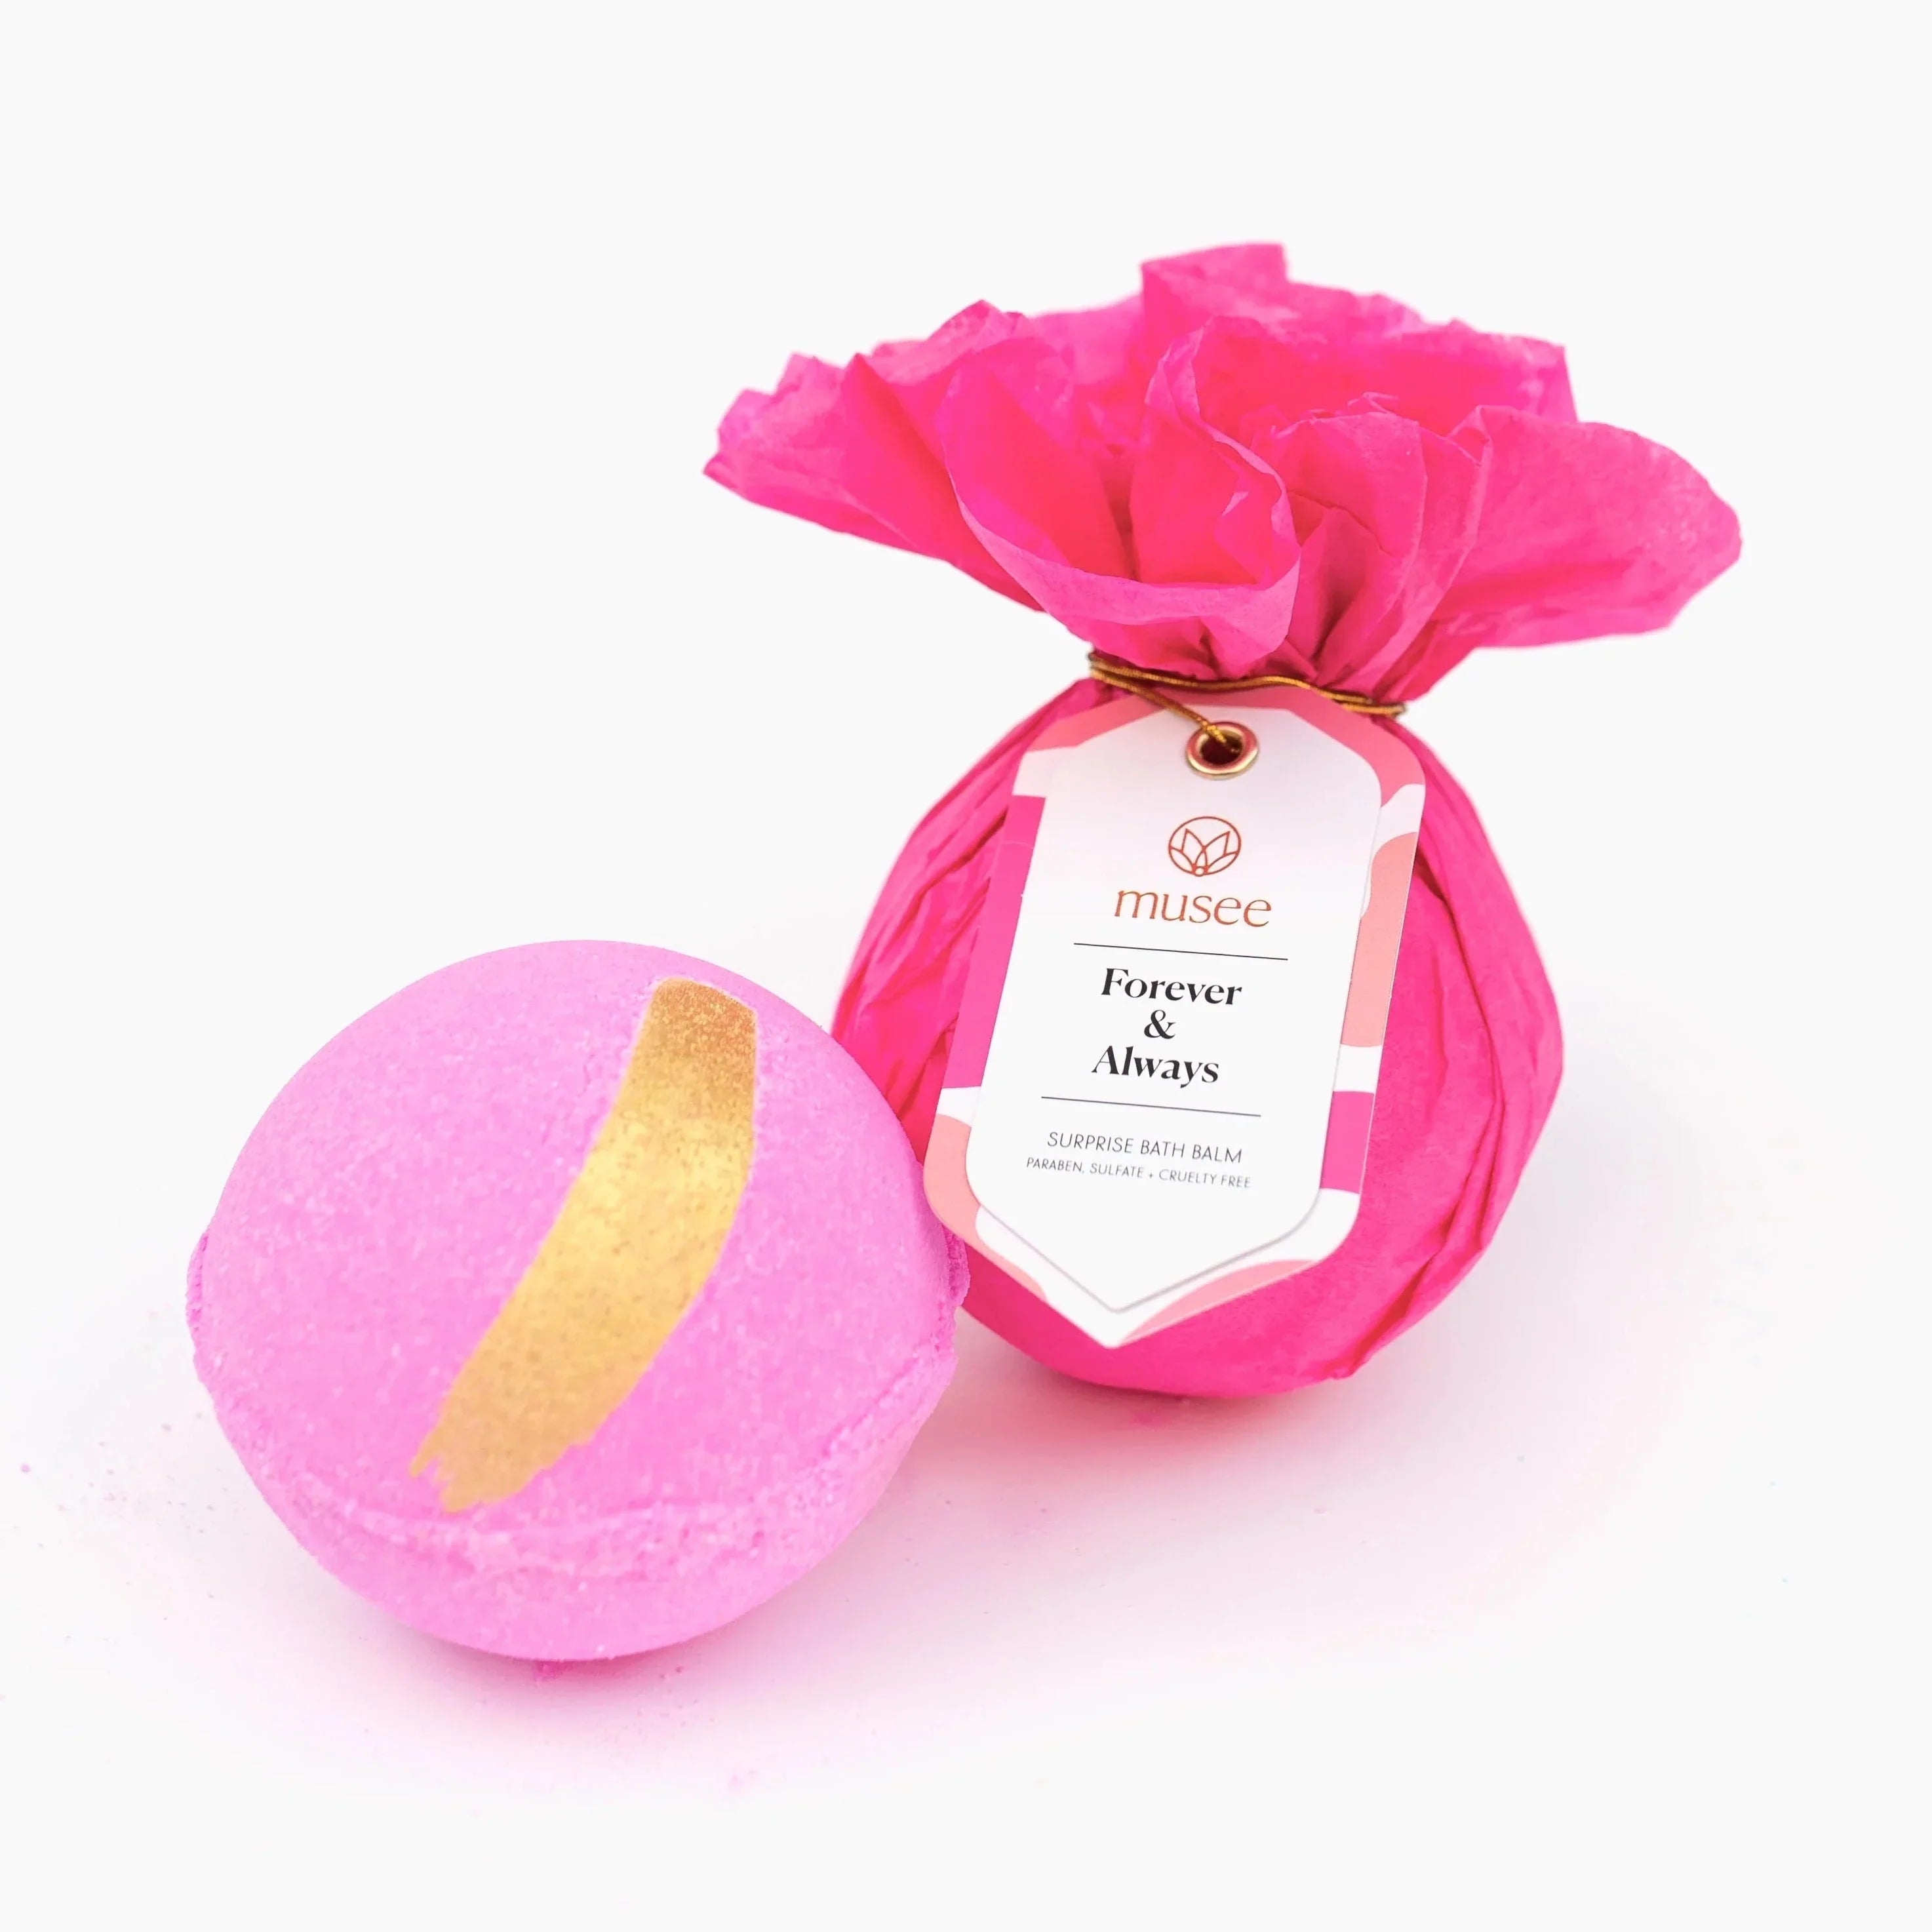 Hot pink tissue paper for bath bomb with a pin and white tag with black text that reads "forever & always". Actual bath bomb is pink with a gold accent stripe at the top